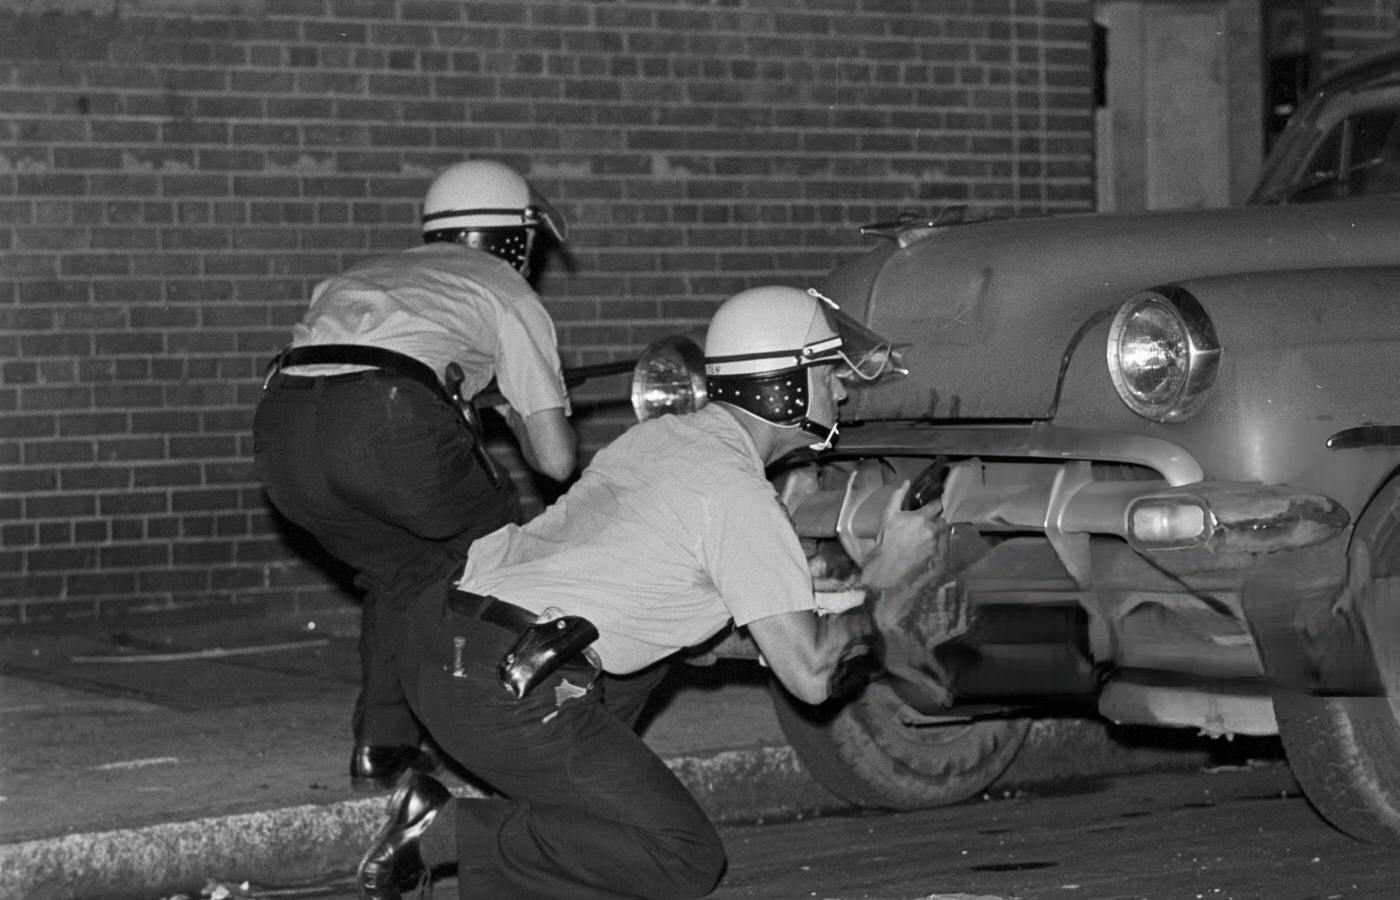 Two police officers in riot helmets take cover behind a parked car